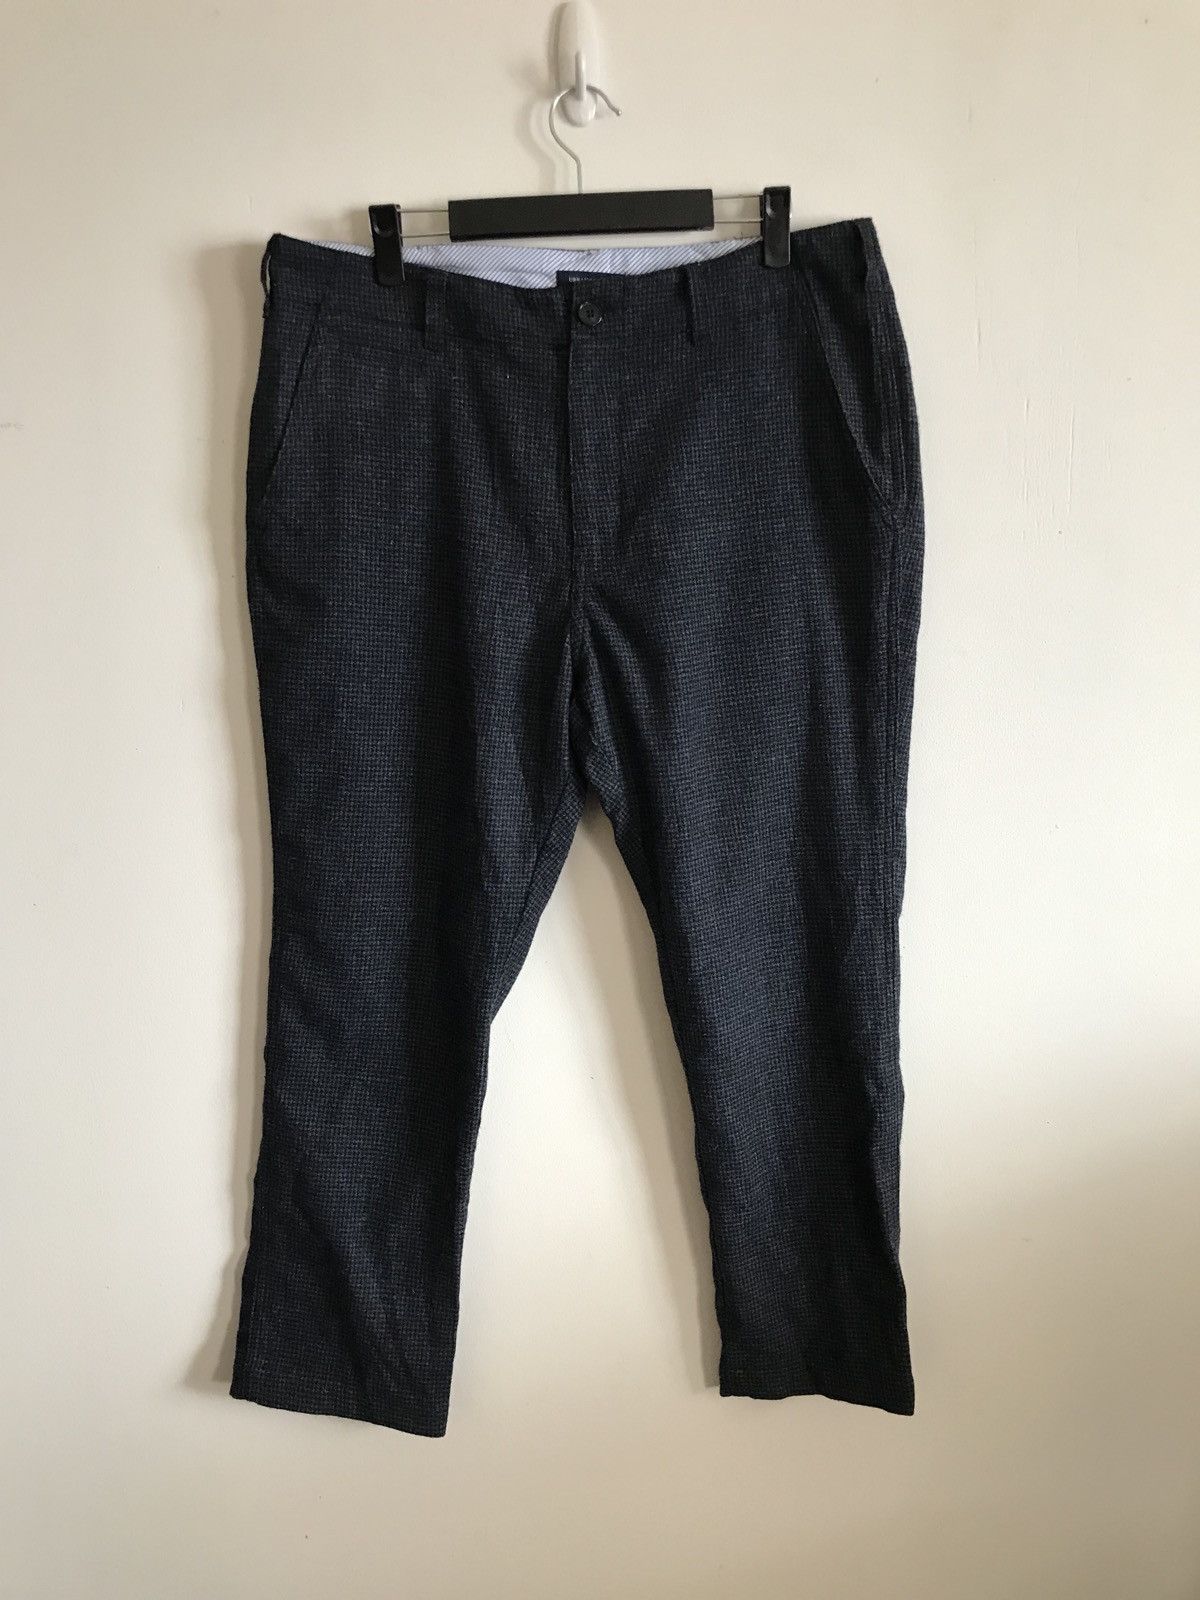 Urban Research Doors Made In Japan Urban Research Black Houndstooth Casual Pants Size US 34 / EU 50 - 2 Preview